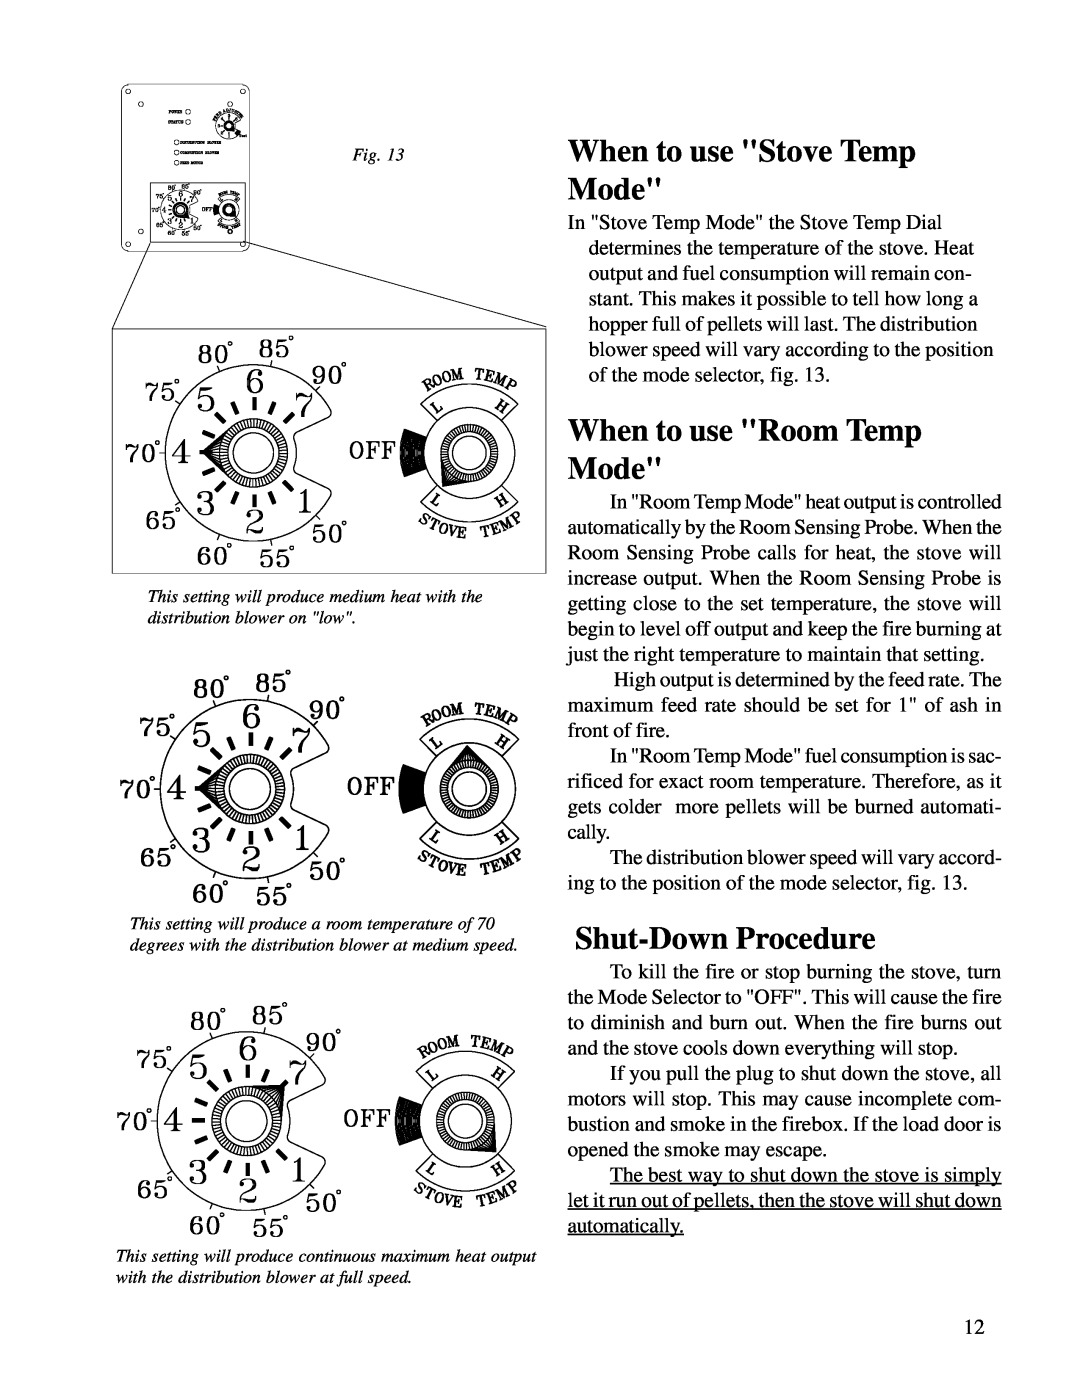 Harman Stove Company R6 owner manual When to use Stove Temp Mode, When to use Room Temp Mode, Shut-DownProcedure 